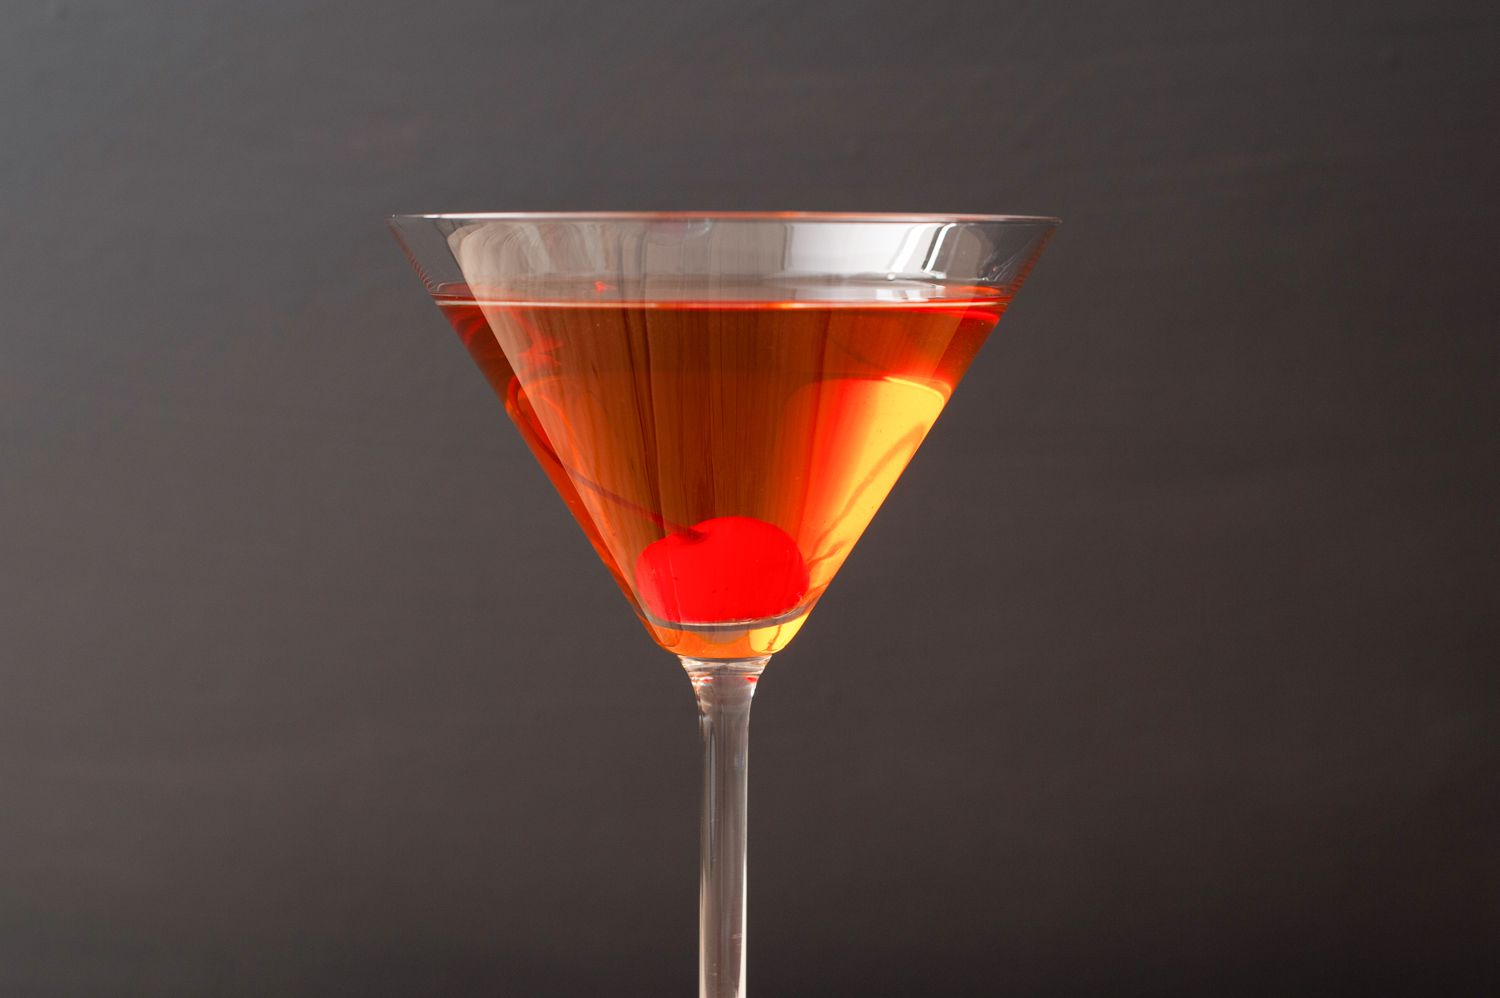 Fantastic by Any Name The Rob Roy or Scotch Manhattan